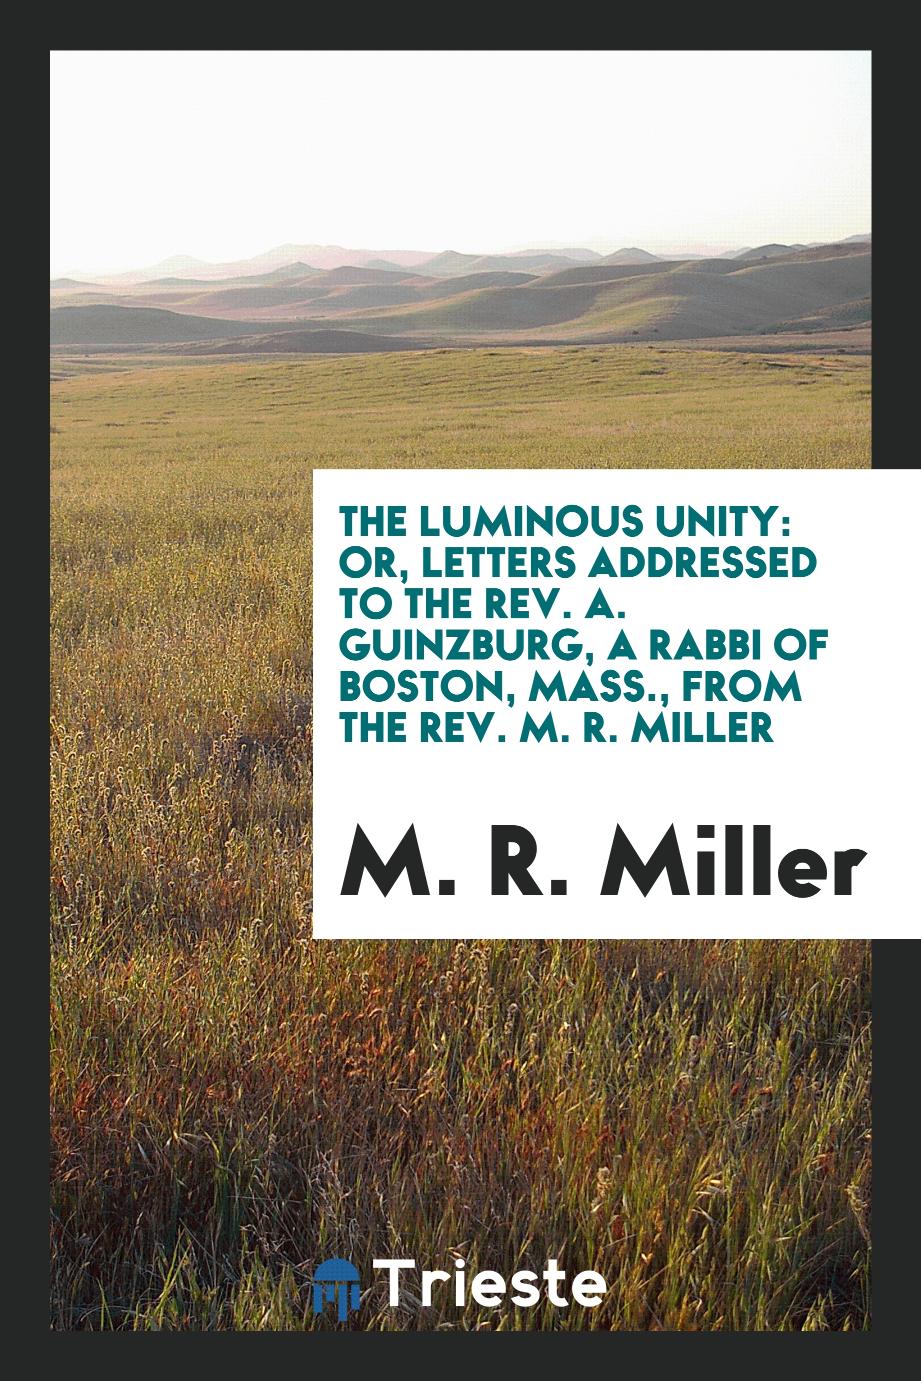 The luminous unity: or, Letters addressed to the Rev. A. Guinzburg, a rabbi of Boston, Mass., from the Rev. M. R. Miller